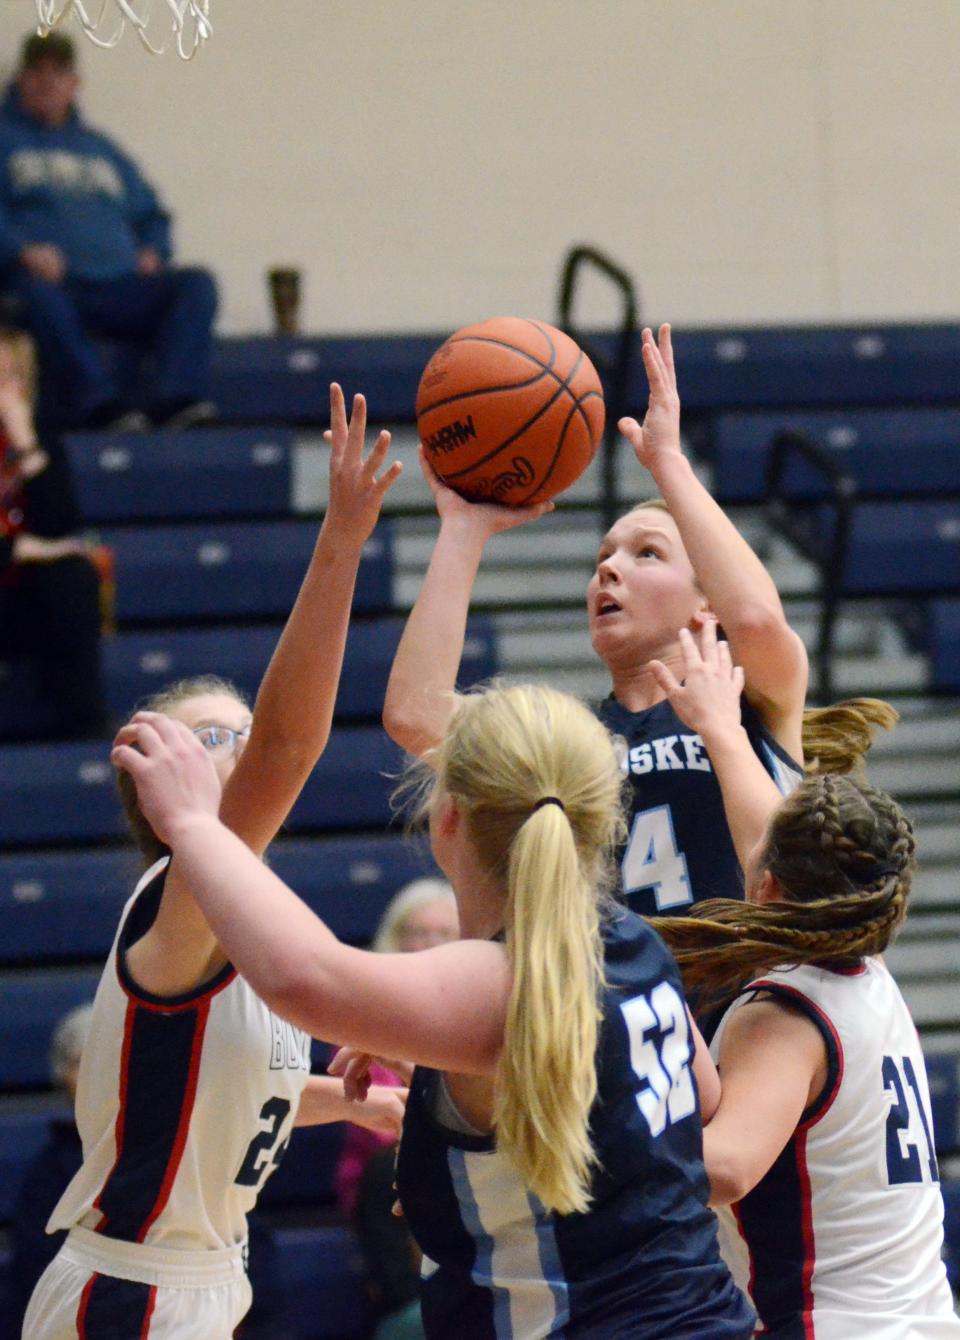 Petoskey's Kenzie Bromley elevates for a shot under the basket in traffic in the second half.